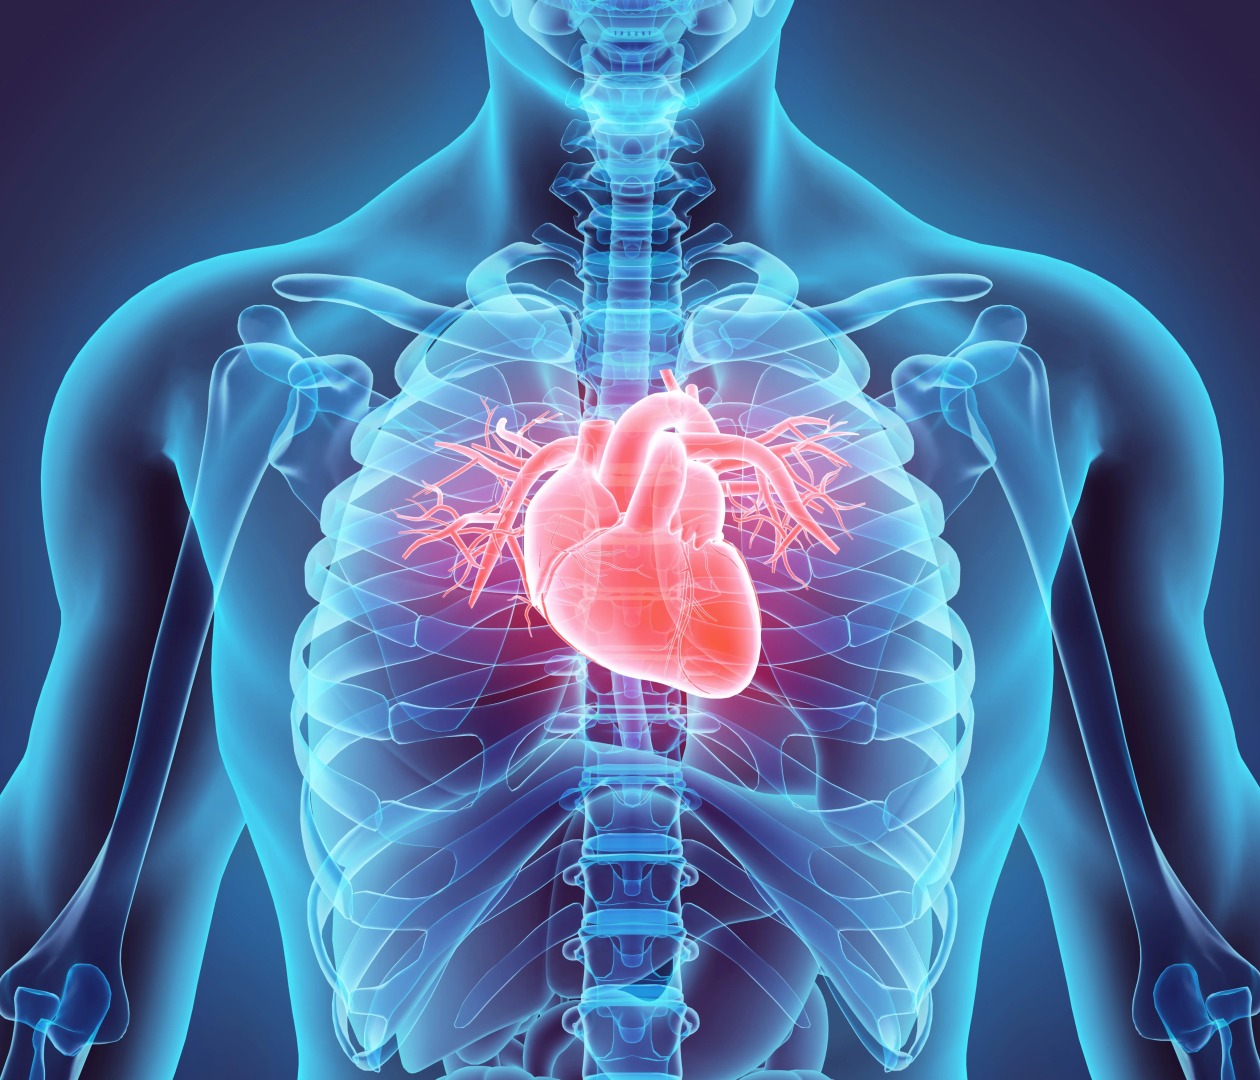 Cardiac Ejection Fraction Determined By Artificial Intelligence